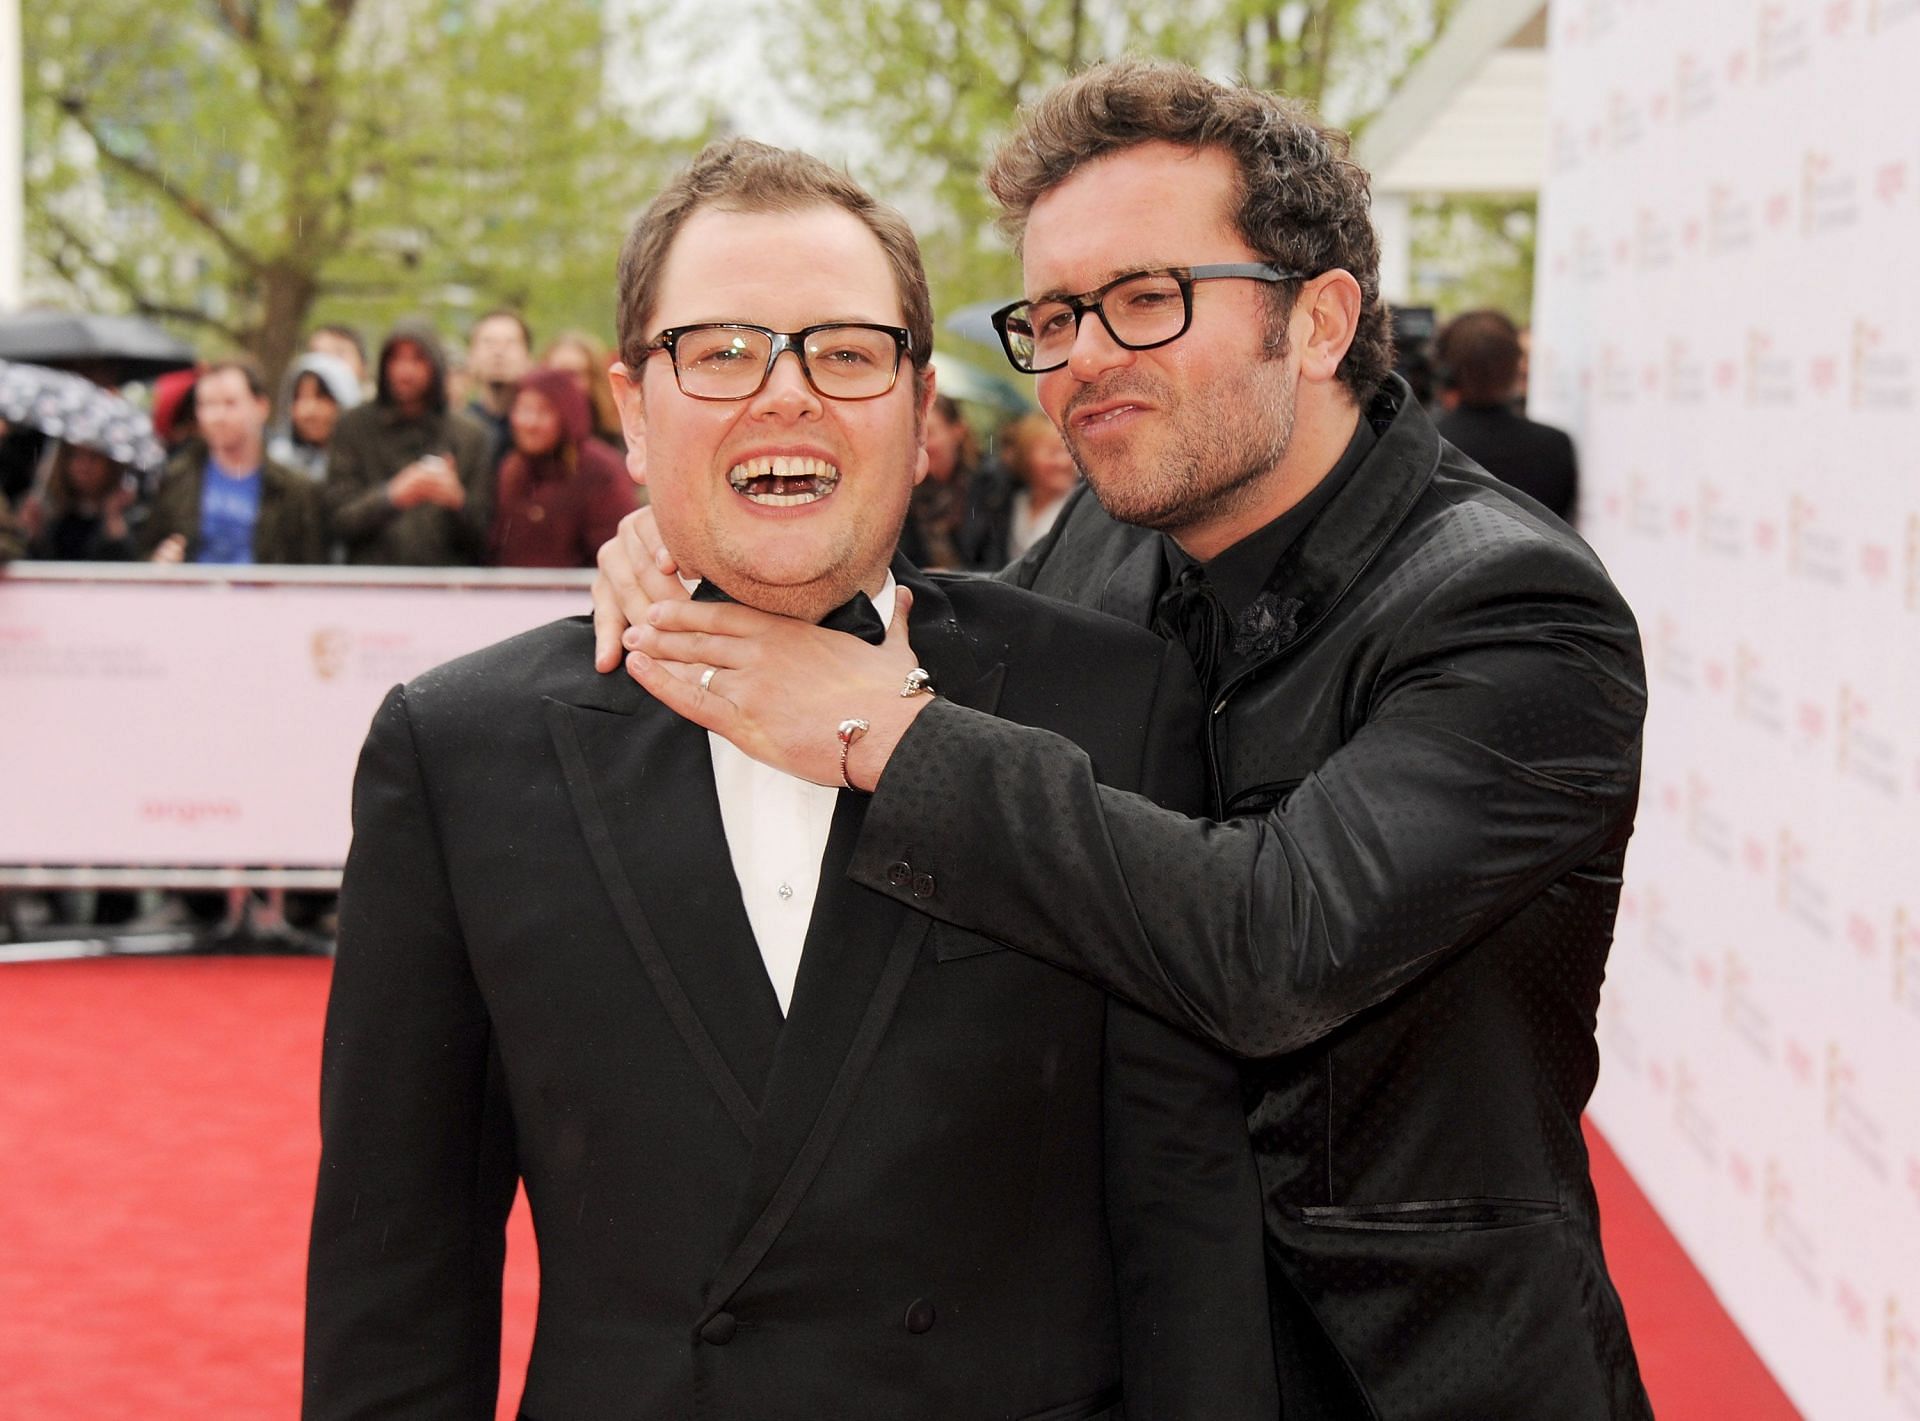 Alan Carr and Paul Drayton (Image via David M. Bennet/Getty Images)